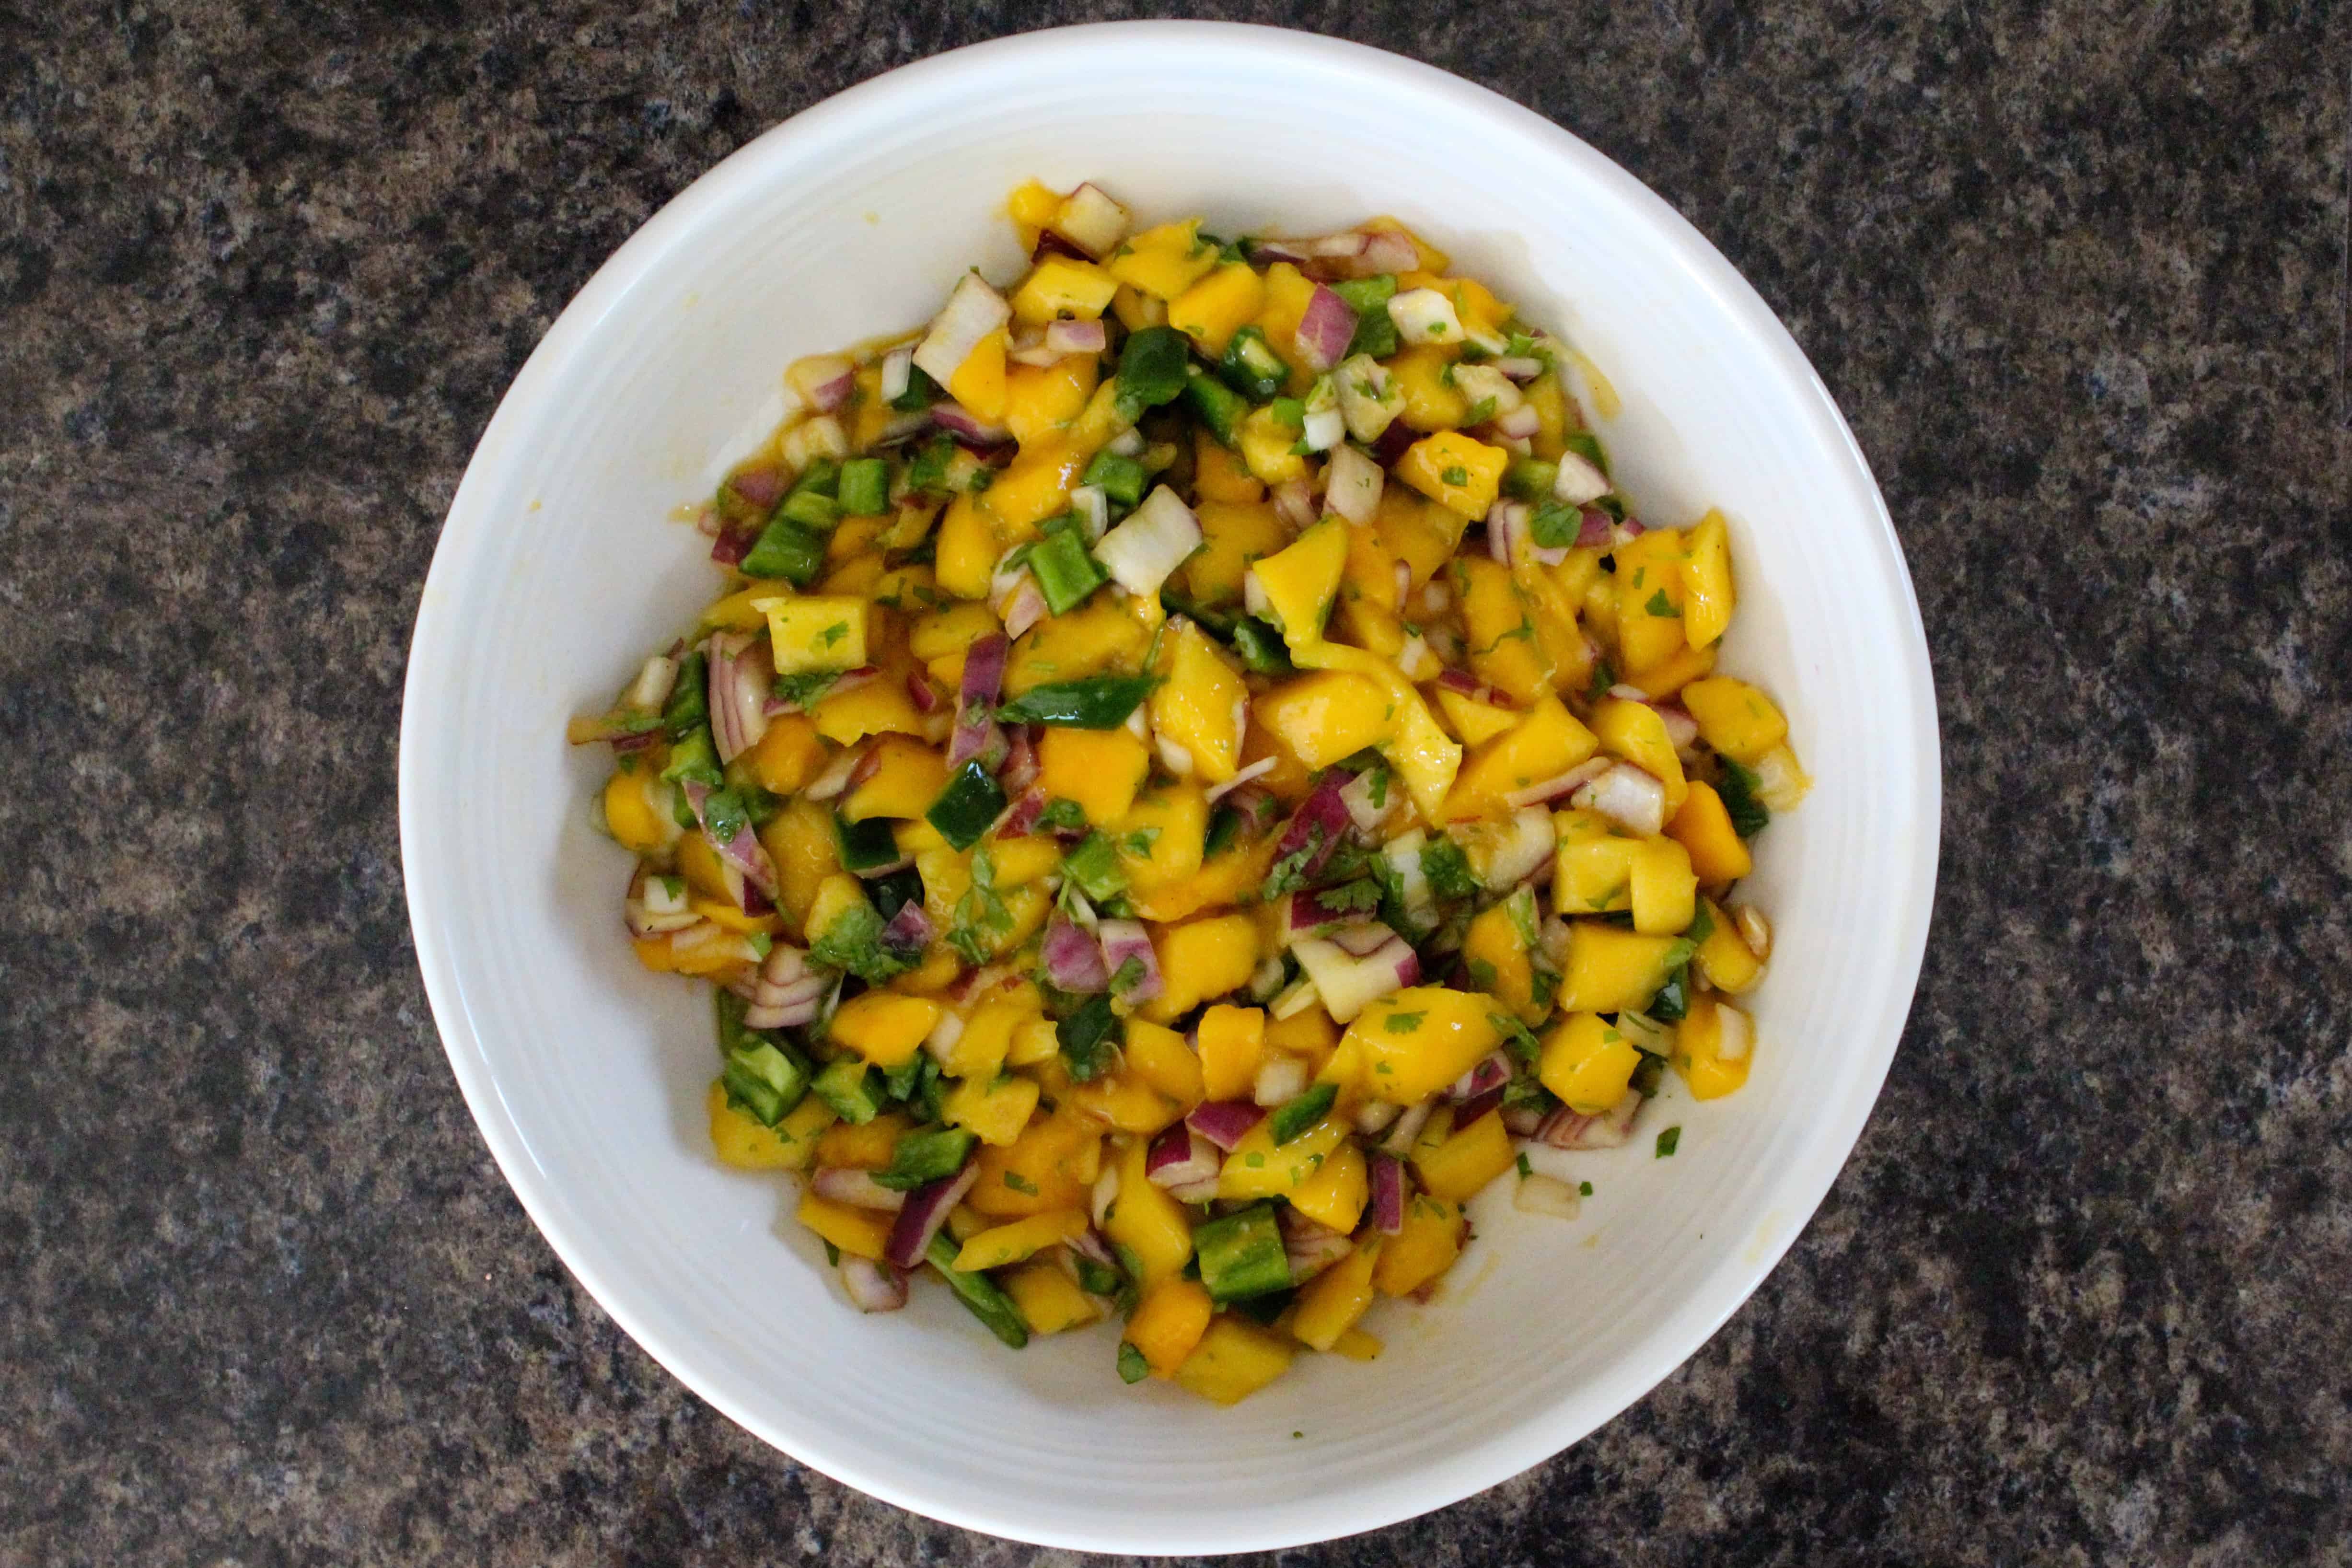 How to shop for, cut and prep mangoes, plus a mango salad